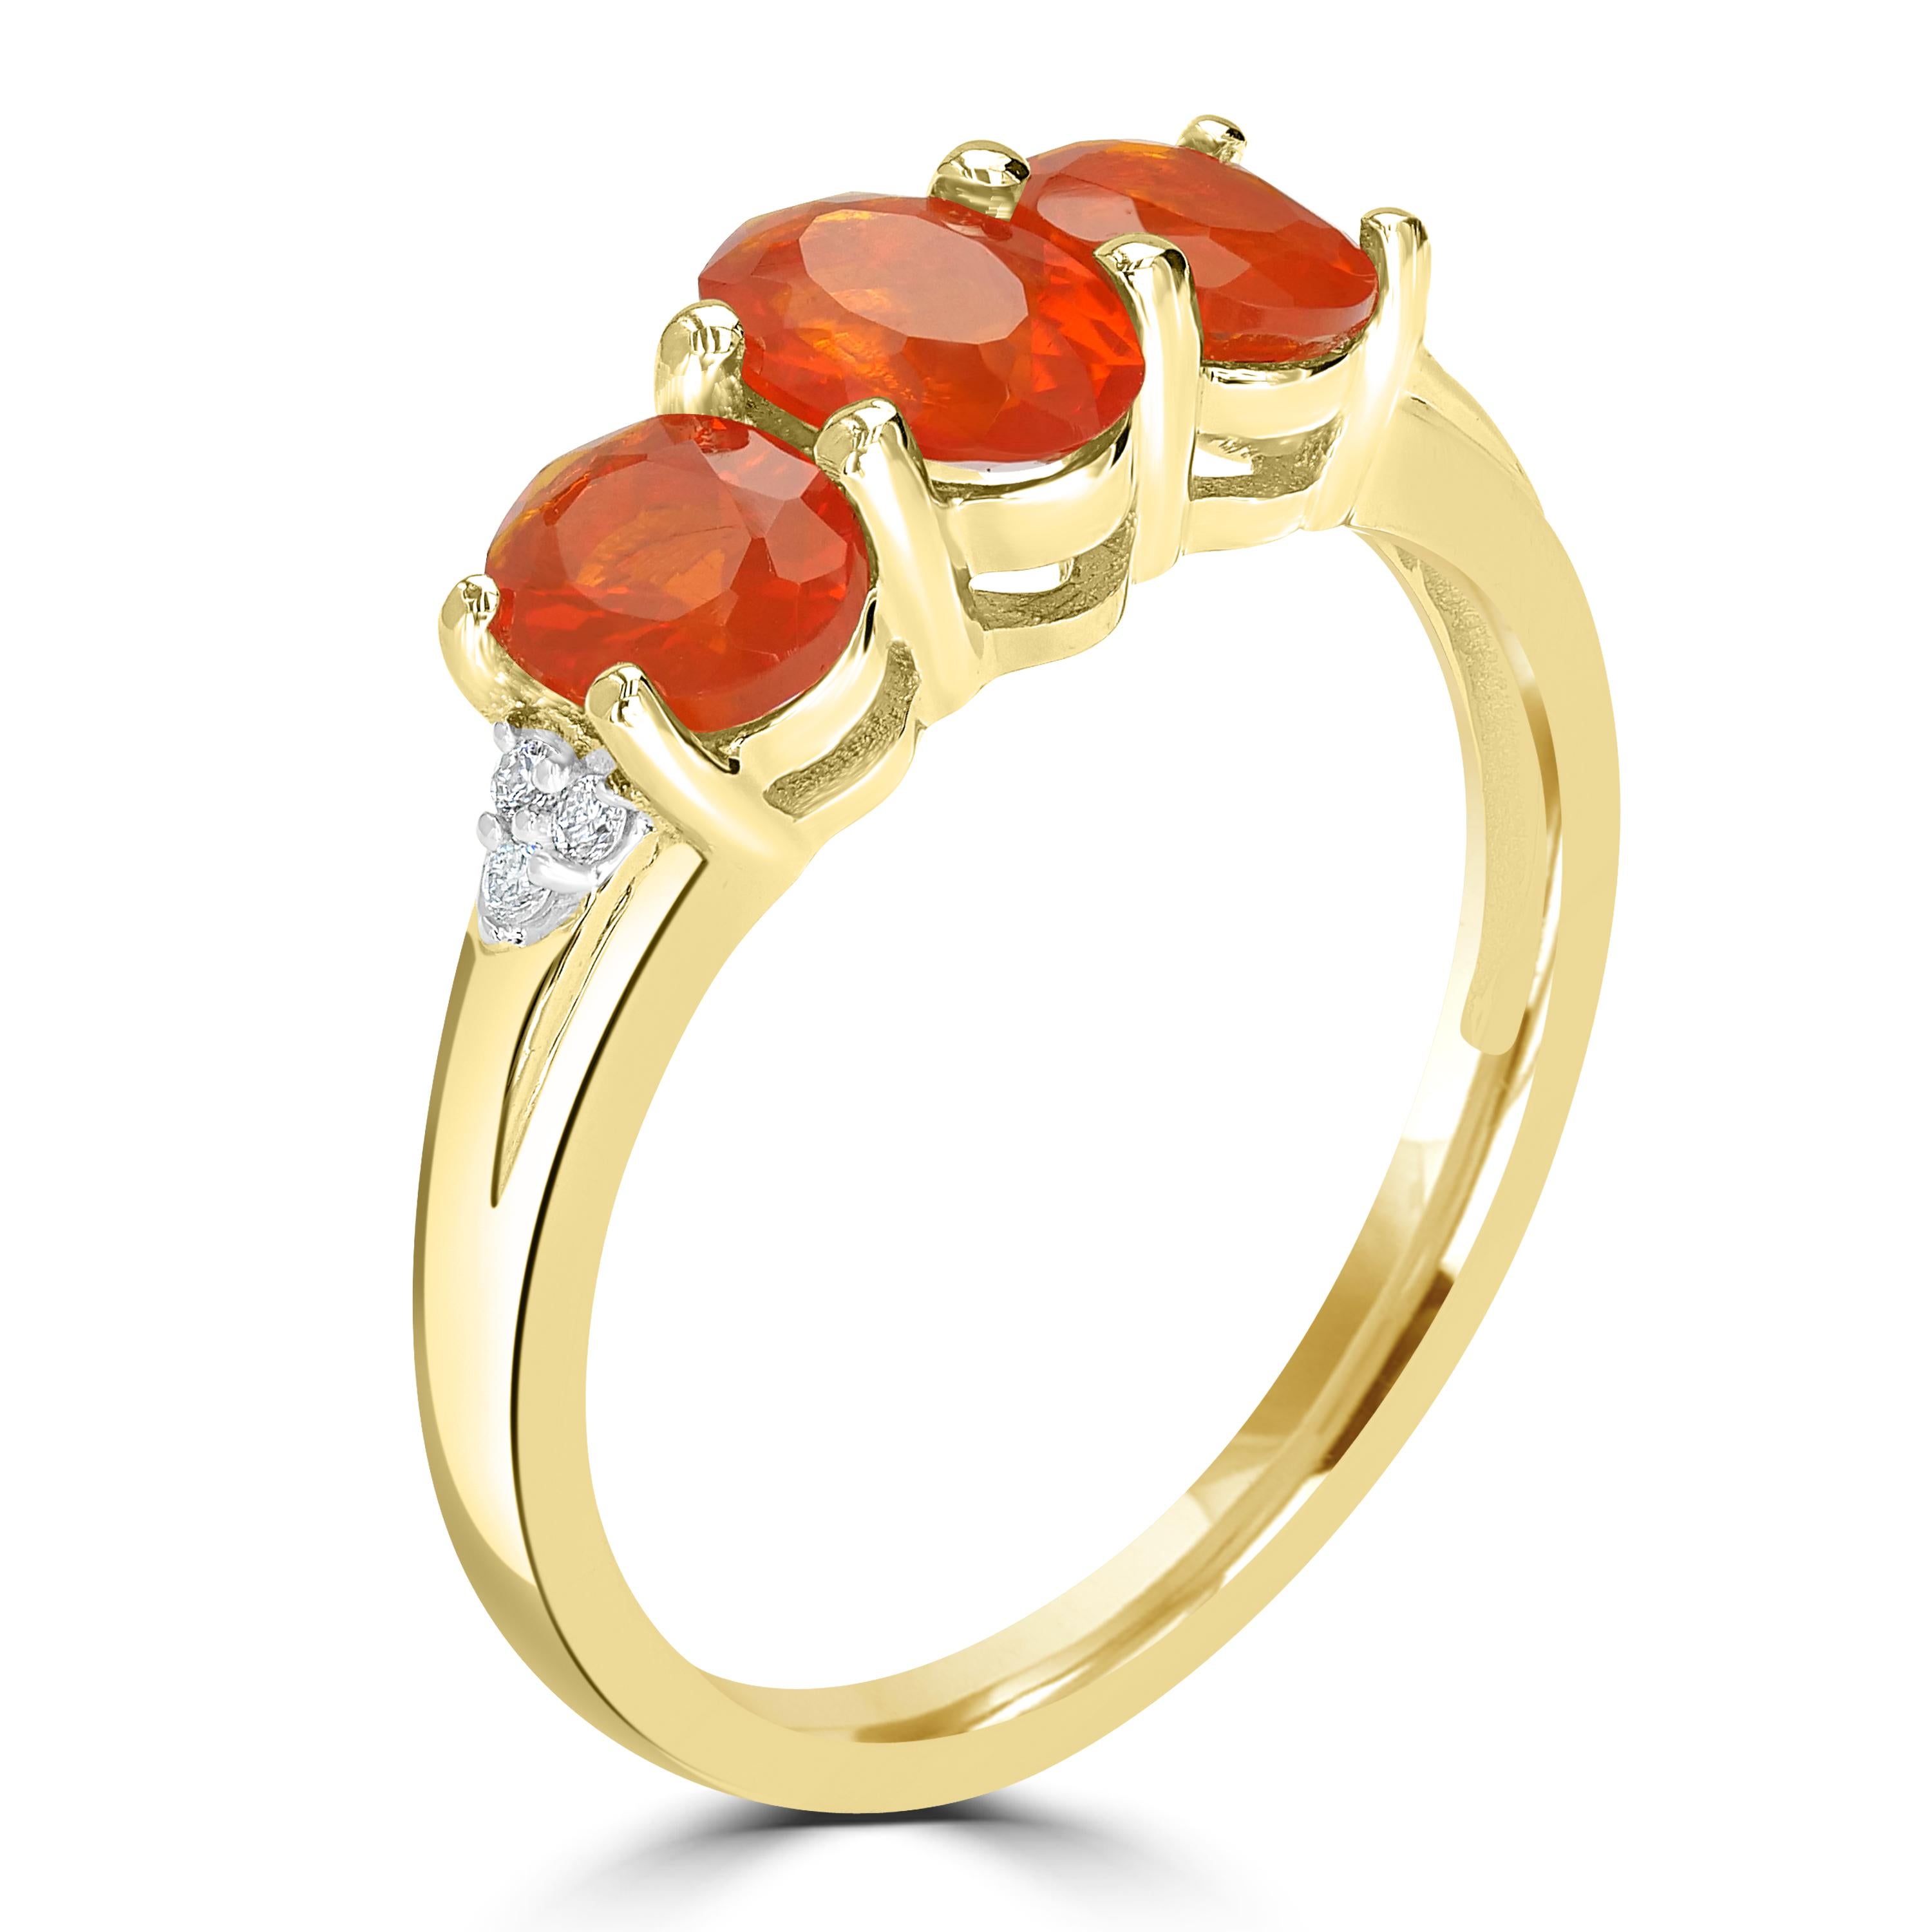 Gemistry 0.74 Ct. T.W Fire Opal & Diamond Accent Three Stone Ring in 14K Gold 3